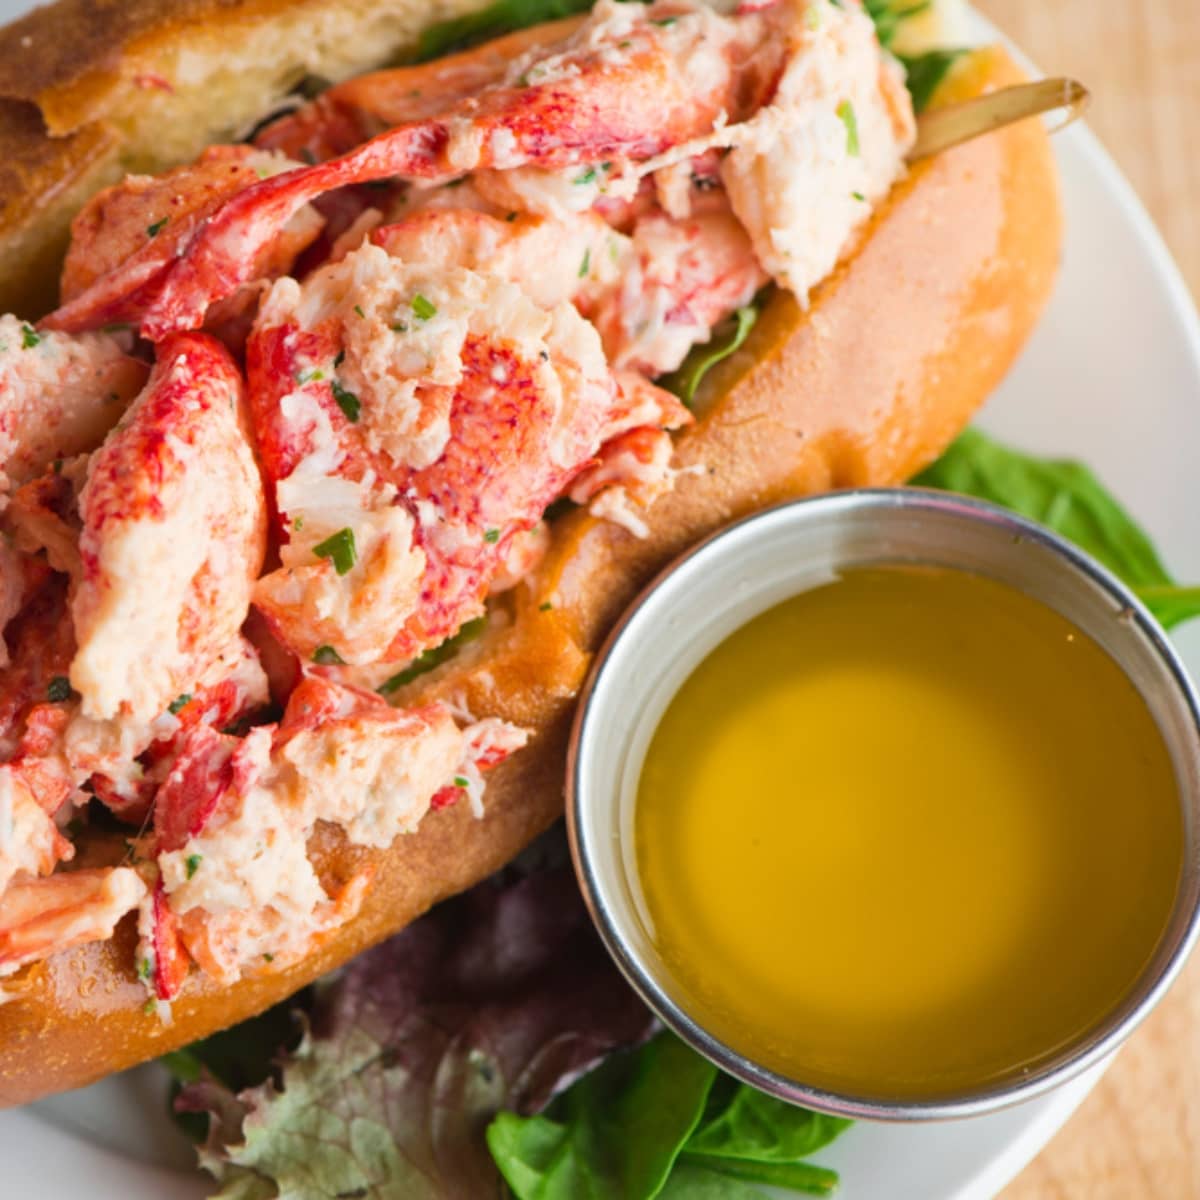 Lobster Roll With Drawn Butter on Sides